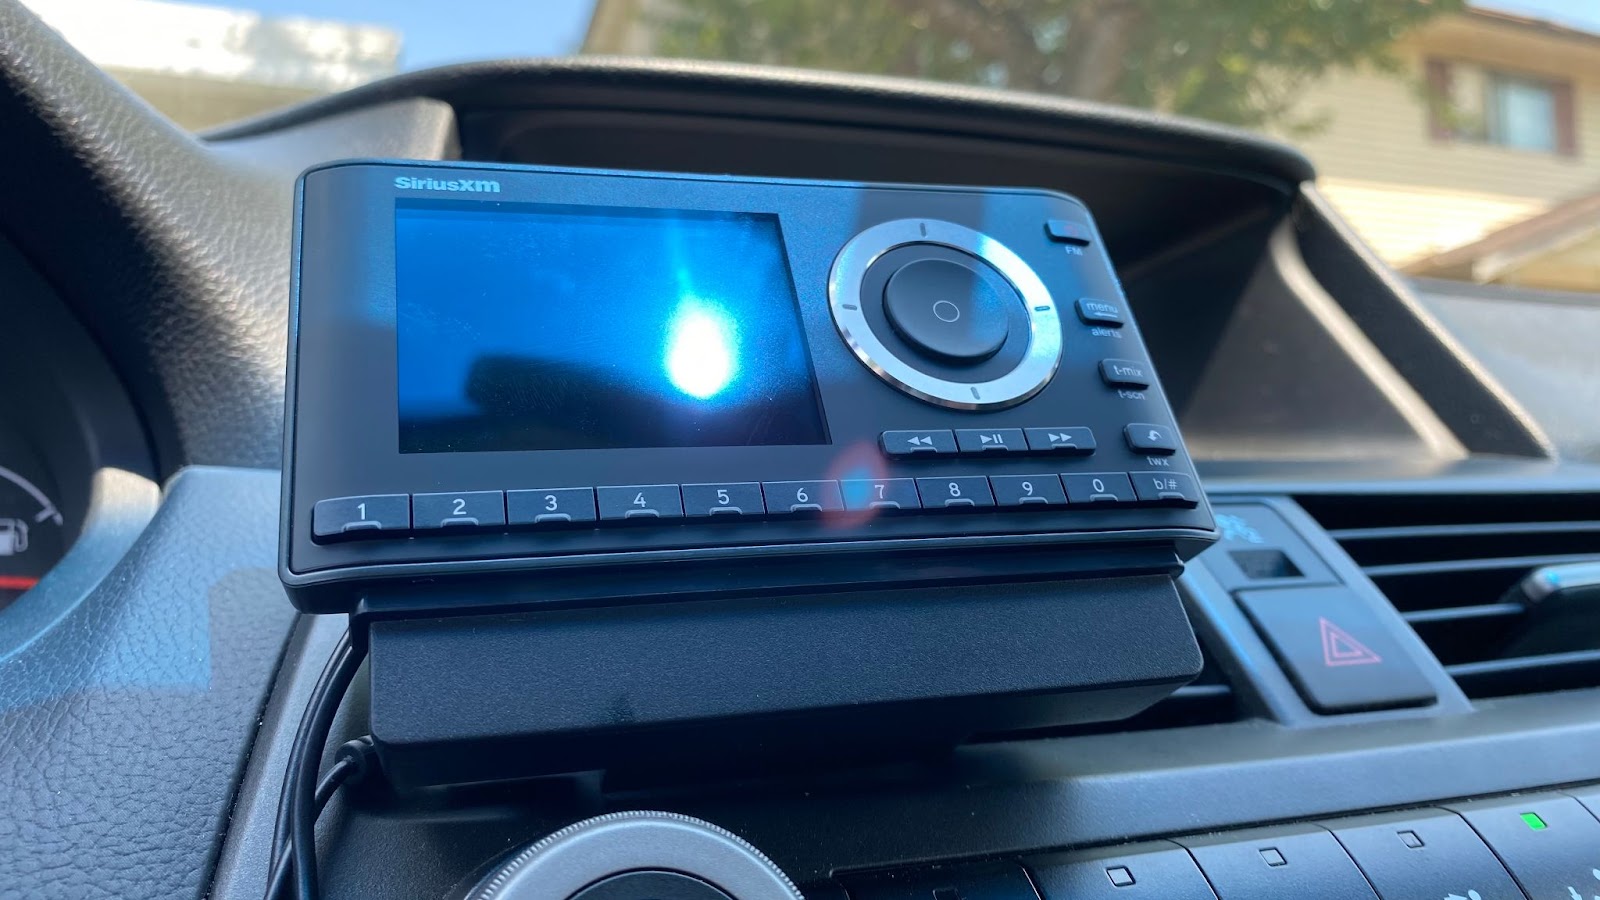 The Sirius XM Onyx Plus Satellite Radio docked in a car using the included vent mount.